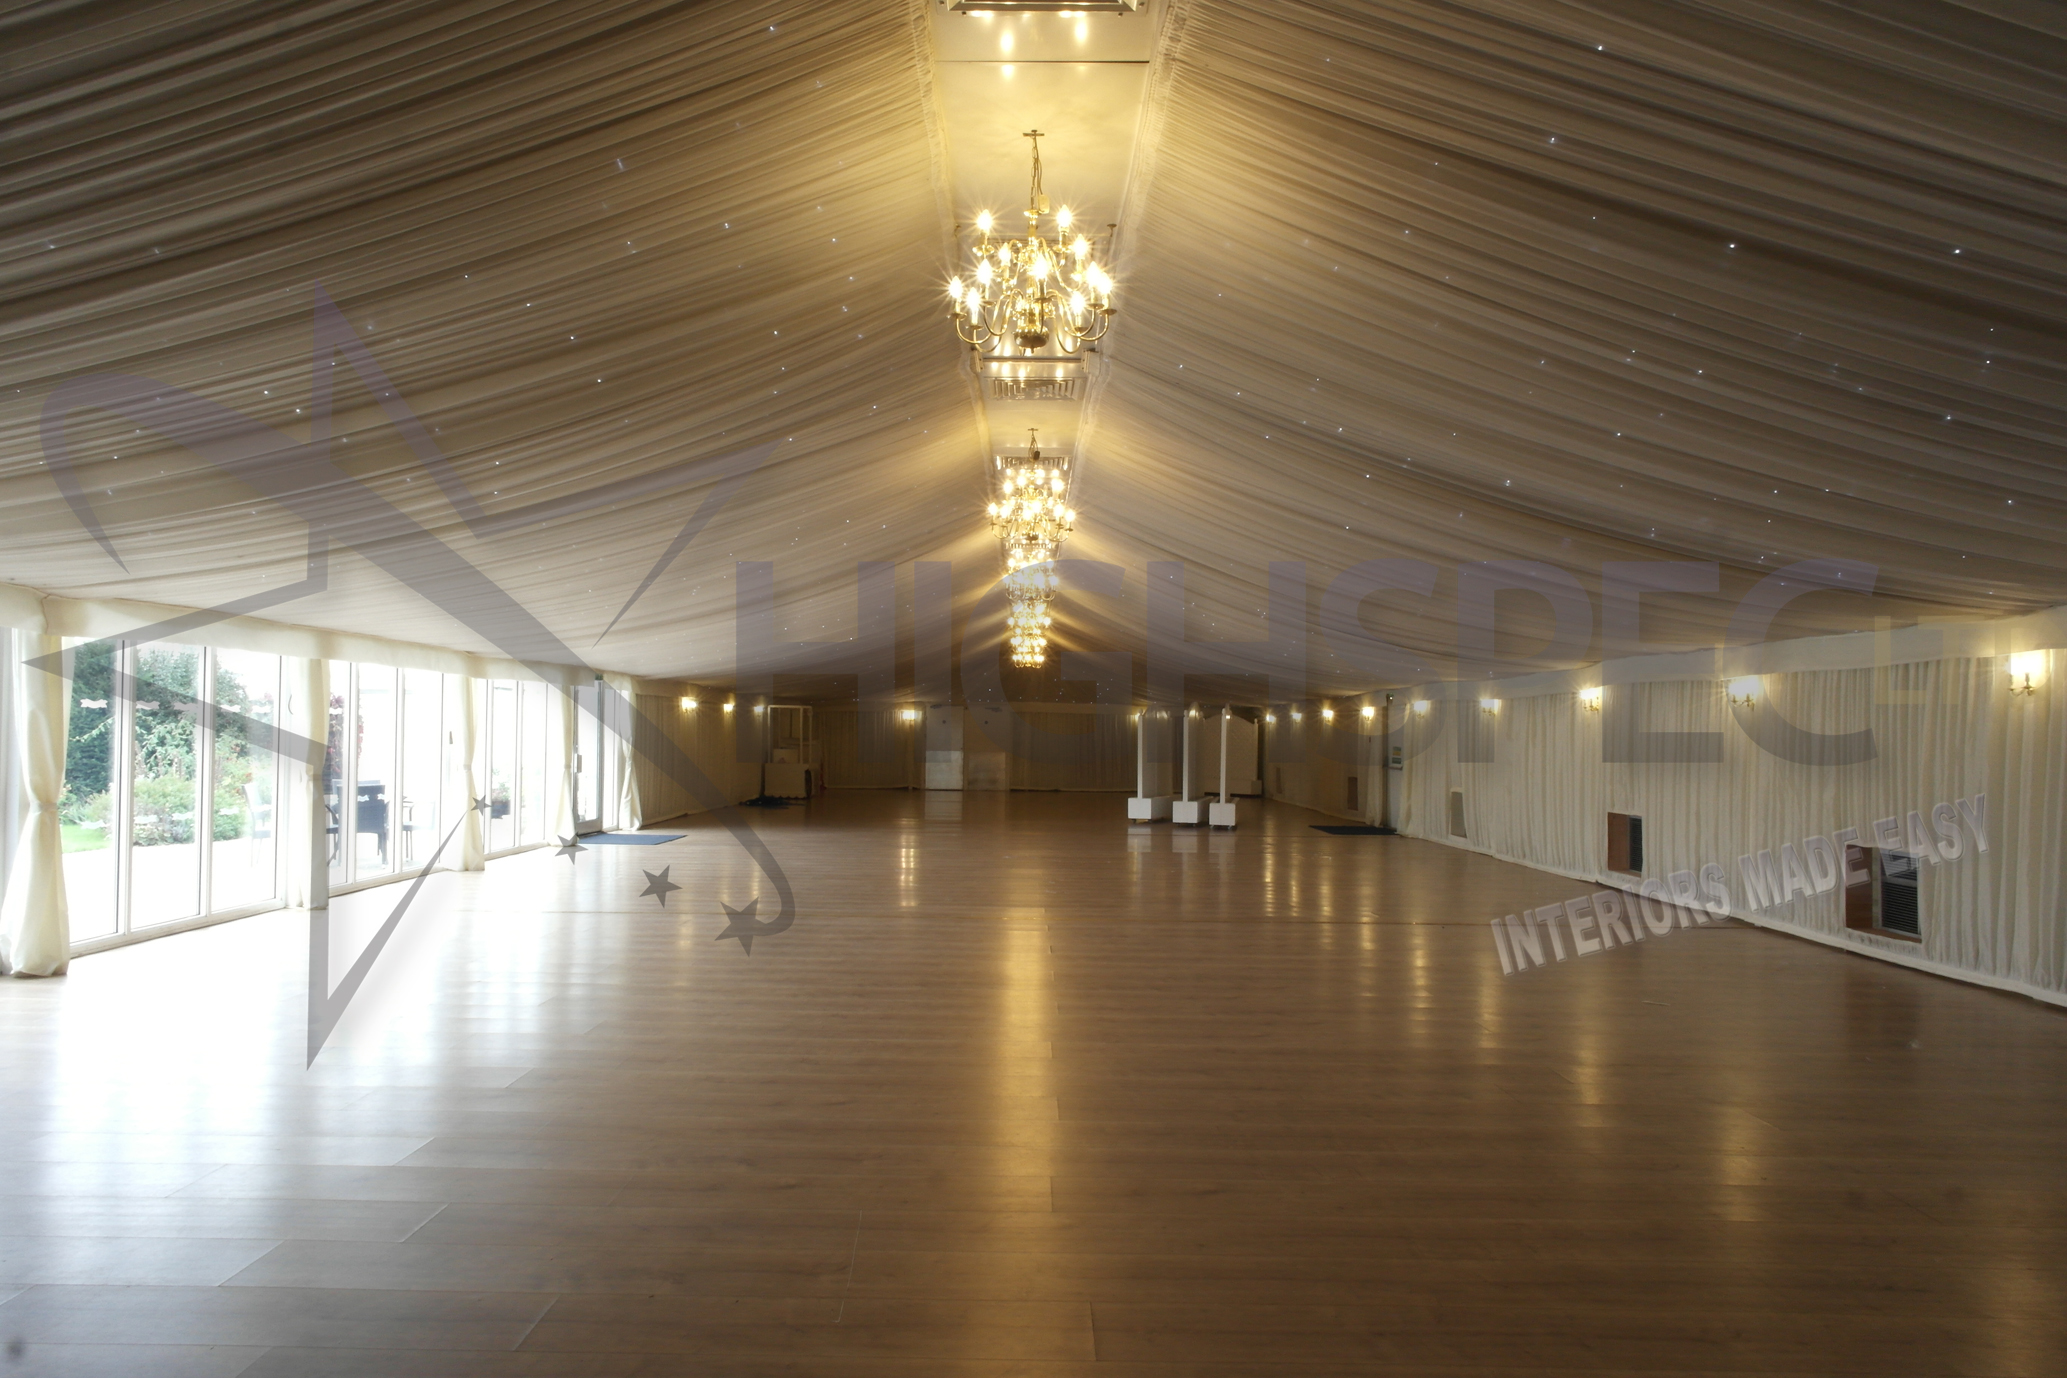 Venue draping - Pleated marquee lining decor